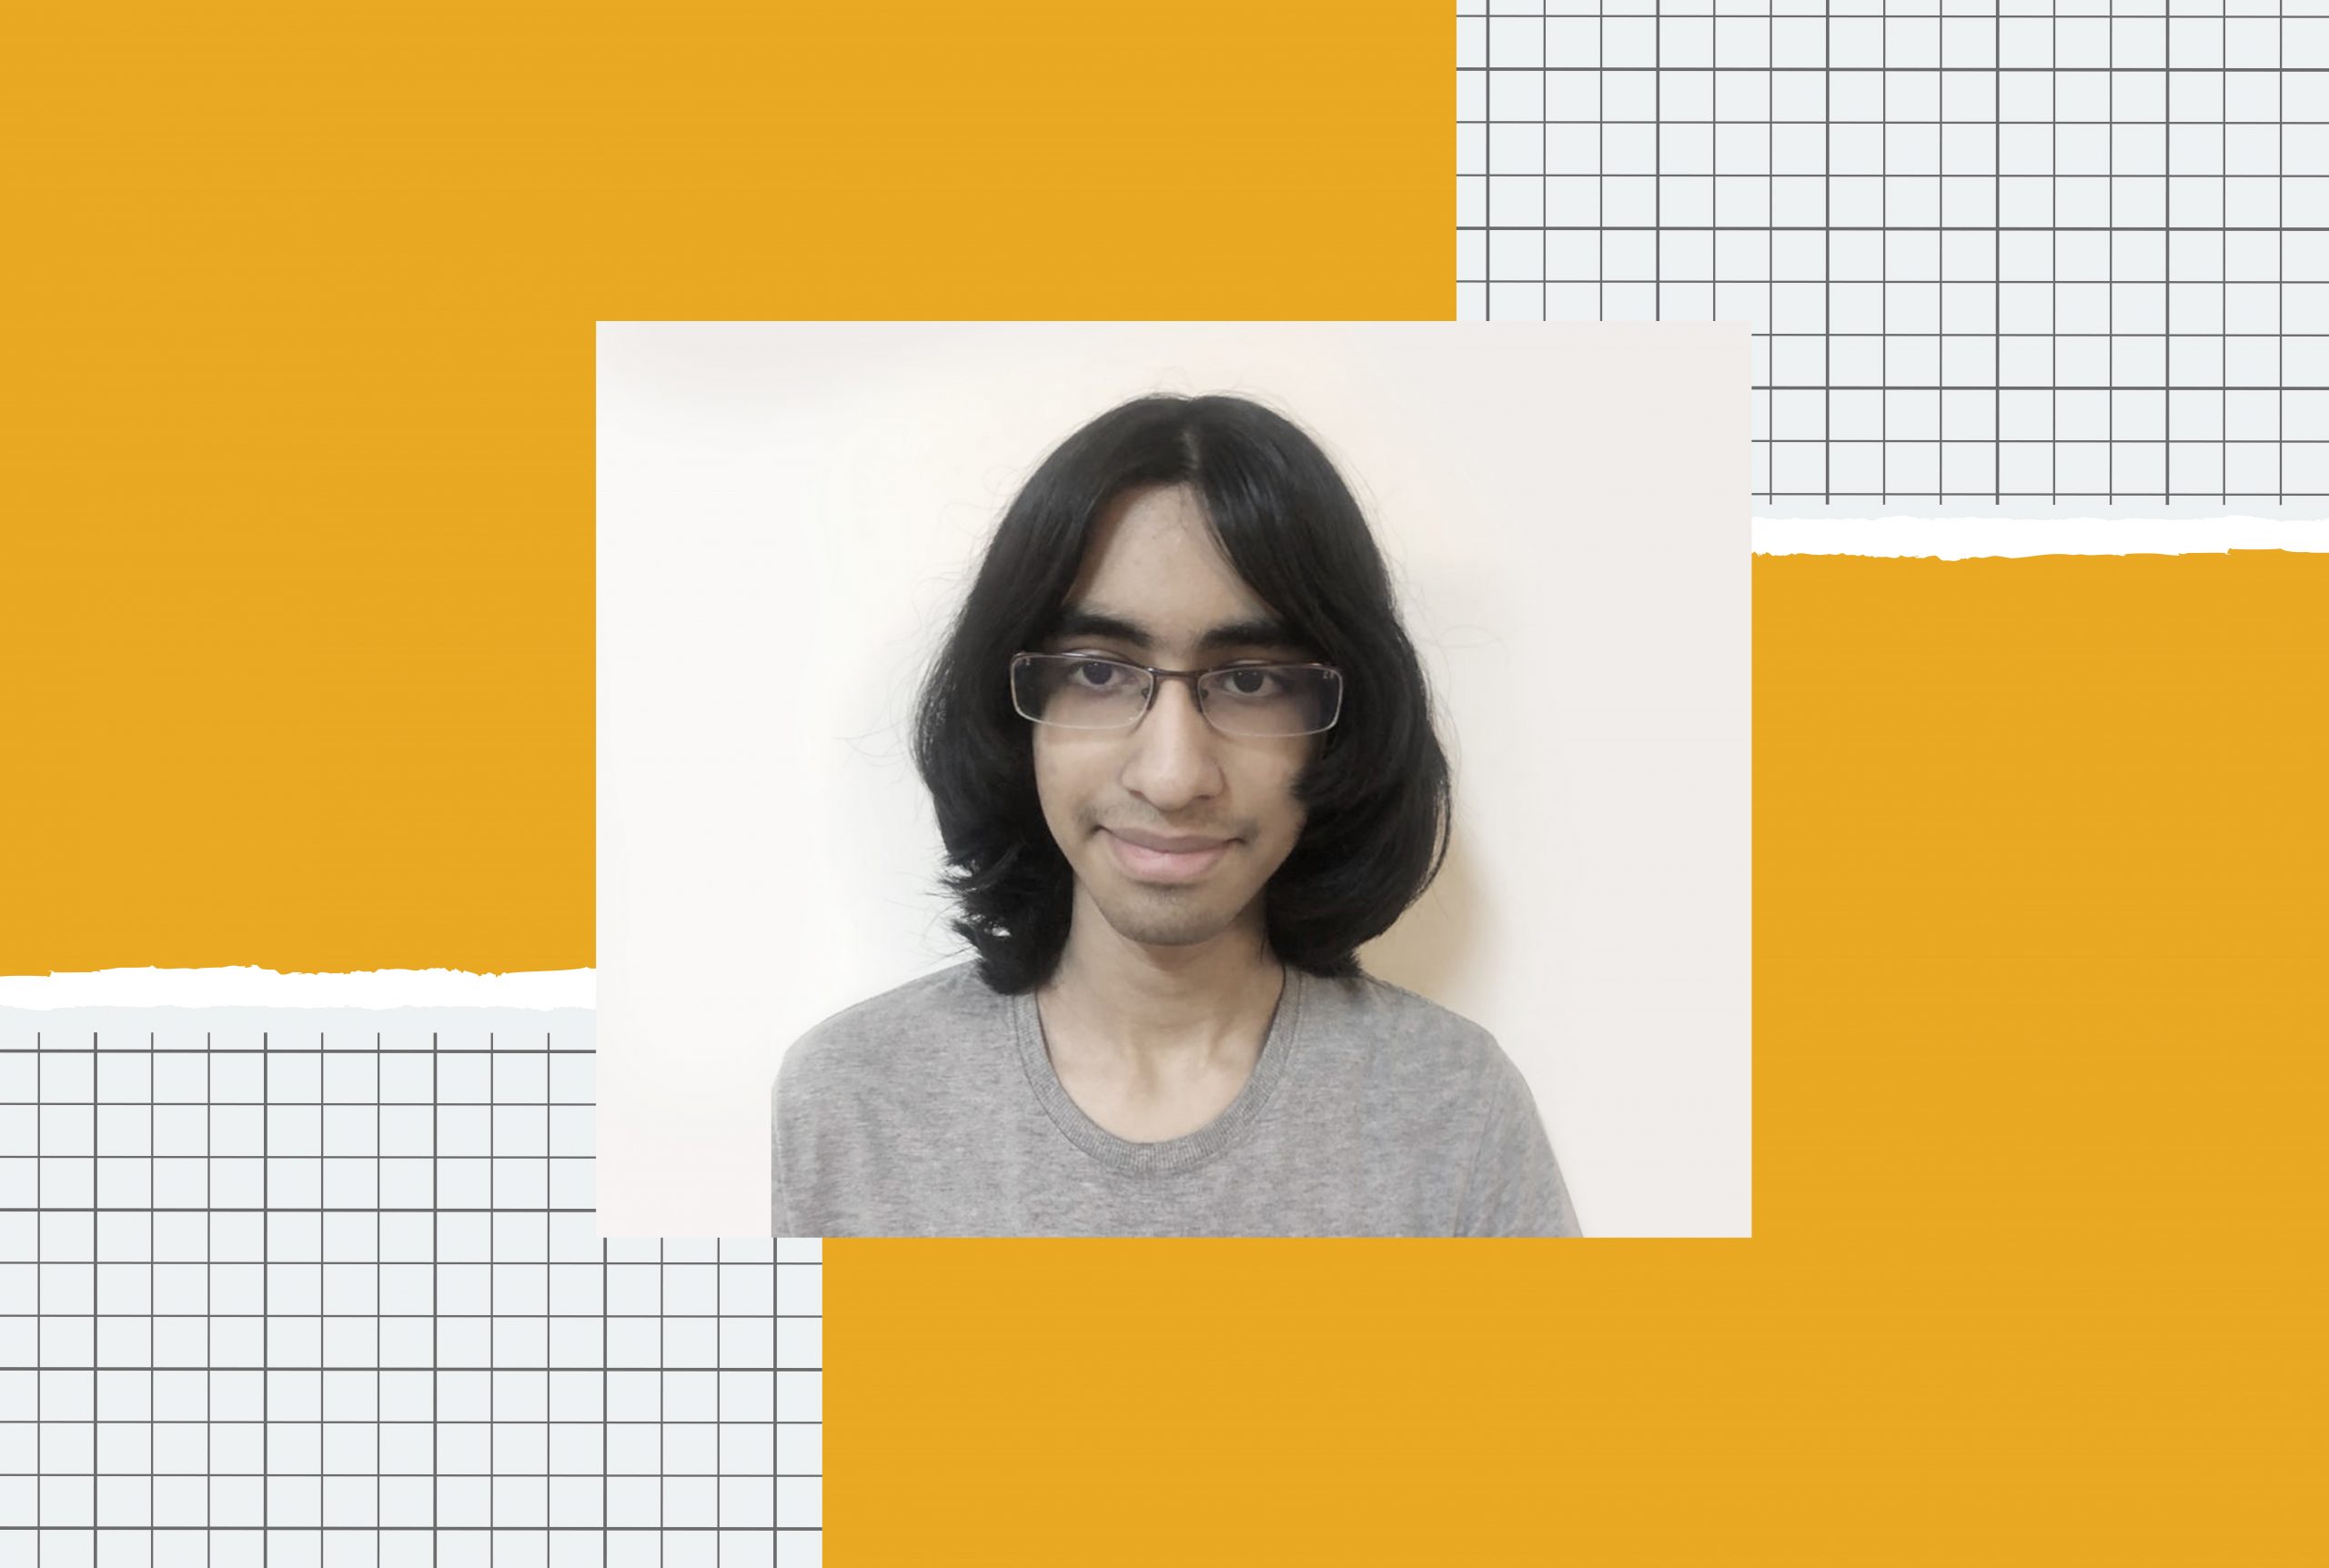 An iilustration with the image of a long-haired Indian boy wearing glasses in the middle.